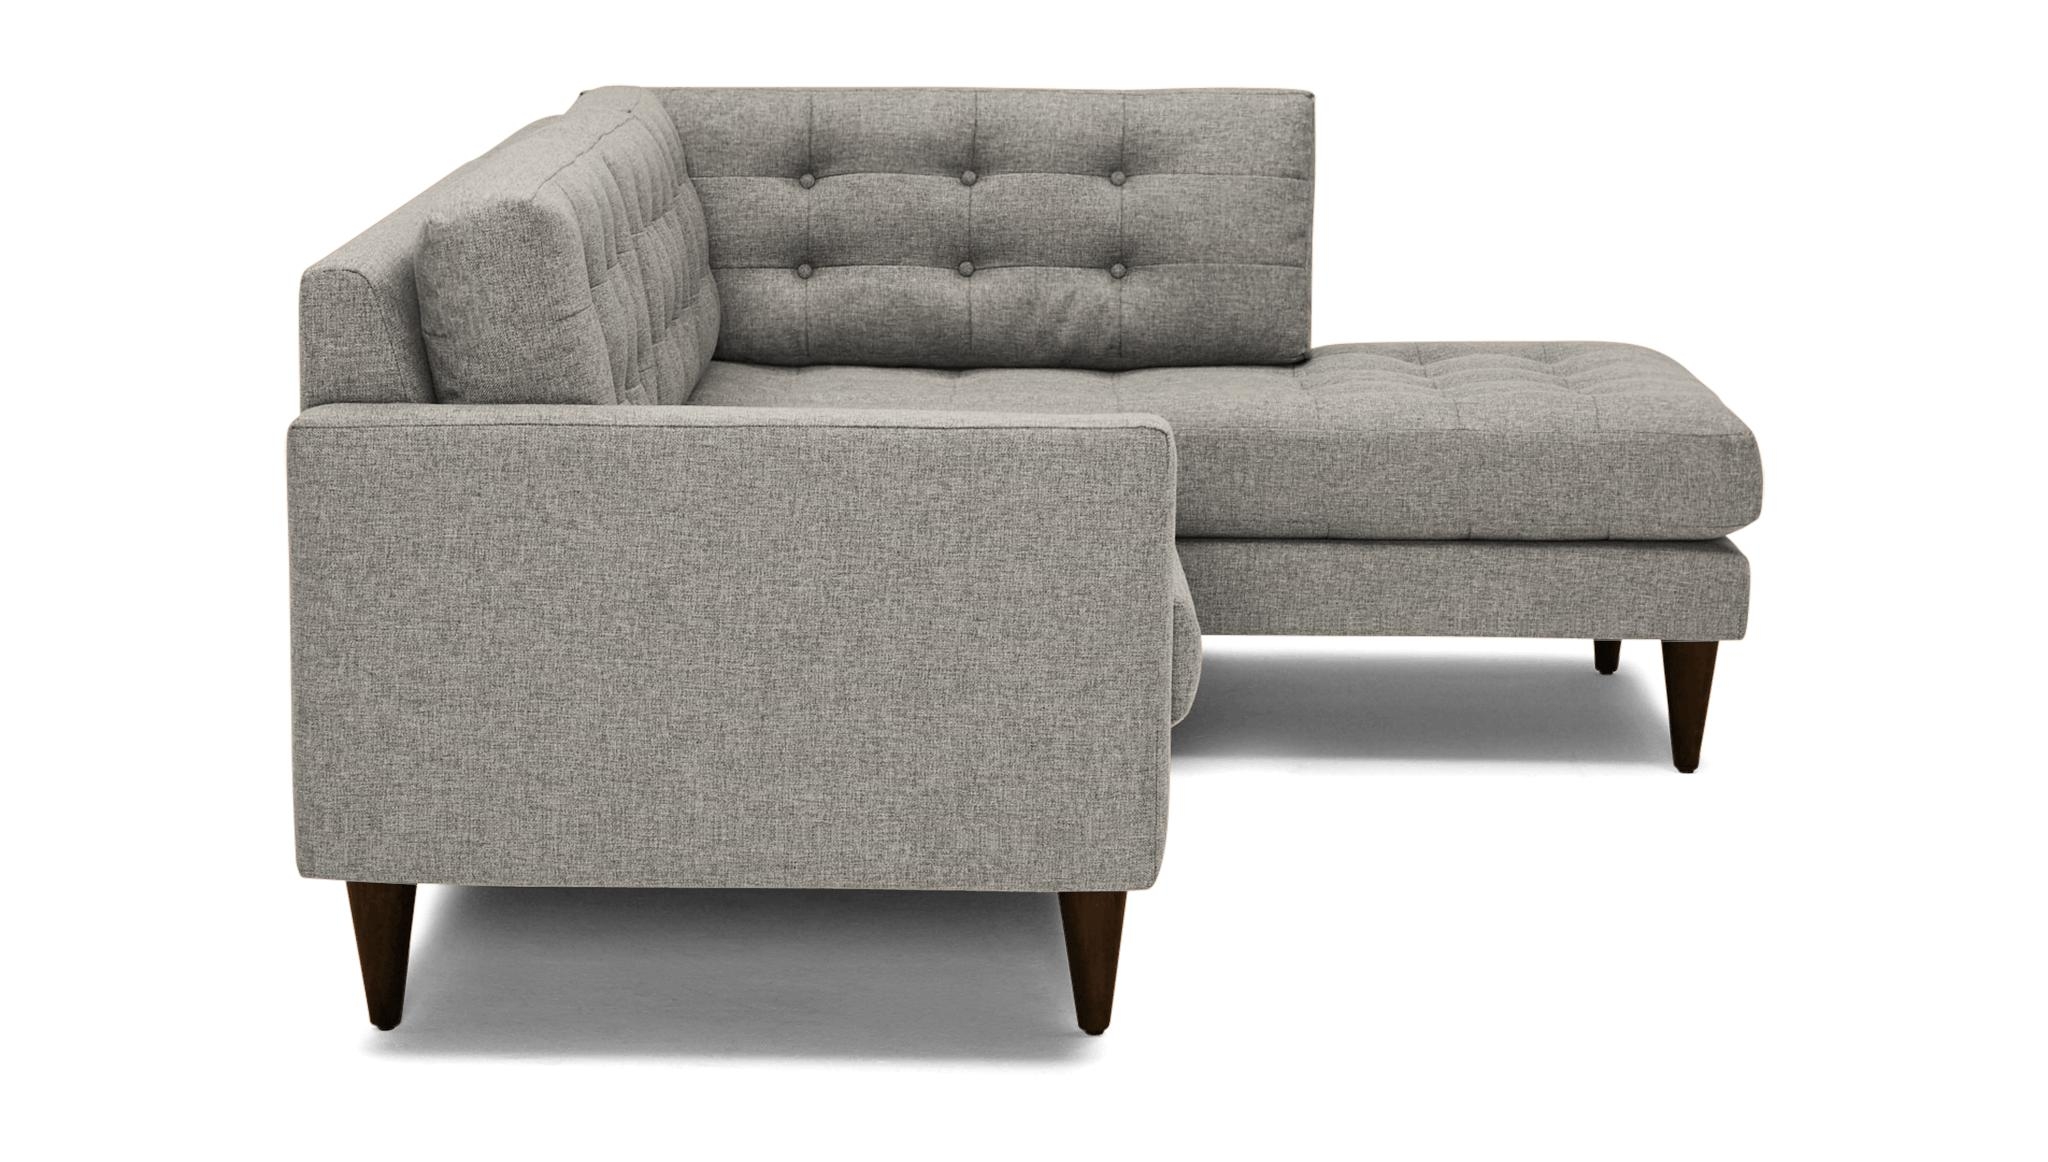 White Eliot Mid Century Modern Apartment Sectional with Bumper - Bloke Cotton - Mocha - Right  - Image 2